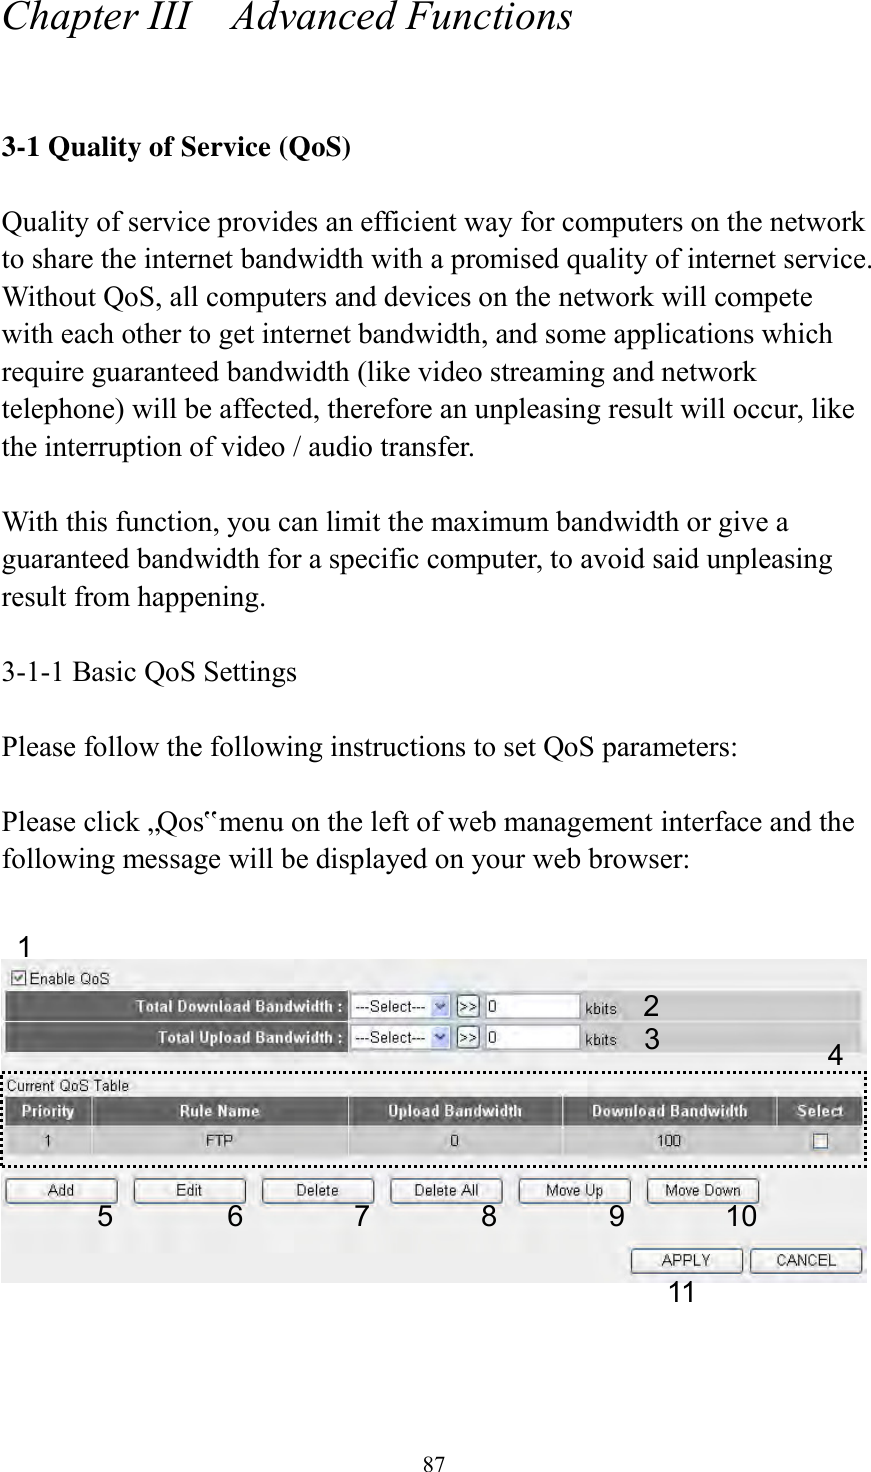  87 Chapter III    Advanced Functions  3-1 Quality of Service (QoS)  Quality of service provides an efficient way for computers on the network to share the internet bandwidth with a promised quality of internet service. Without QoS, all computers and devices on the network will compete with each other to get internet bandwidth, and some applications which require guaranteed bandwidth (like video streaming and network telephone) will be affected, therefore an unpleasing result will occur, like the interruption of video / audio transfer.    With this function, you can limit the maximum bandwidth or give a guaranteed bandwidth for a specific computer, to avoid said unpleasing result from happening.  3-1-1 Basic QoS Settings  Please follow the following instructions to set QoS parameters:  Please click „Qos‟ menu on the left of web management interface and the following message will be displayed on your web browser:       1 2 3 4 5 6 7 8 9 10 11 